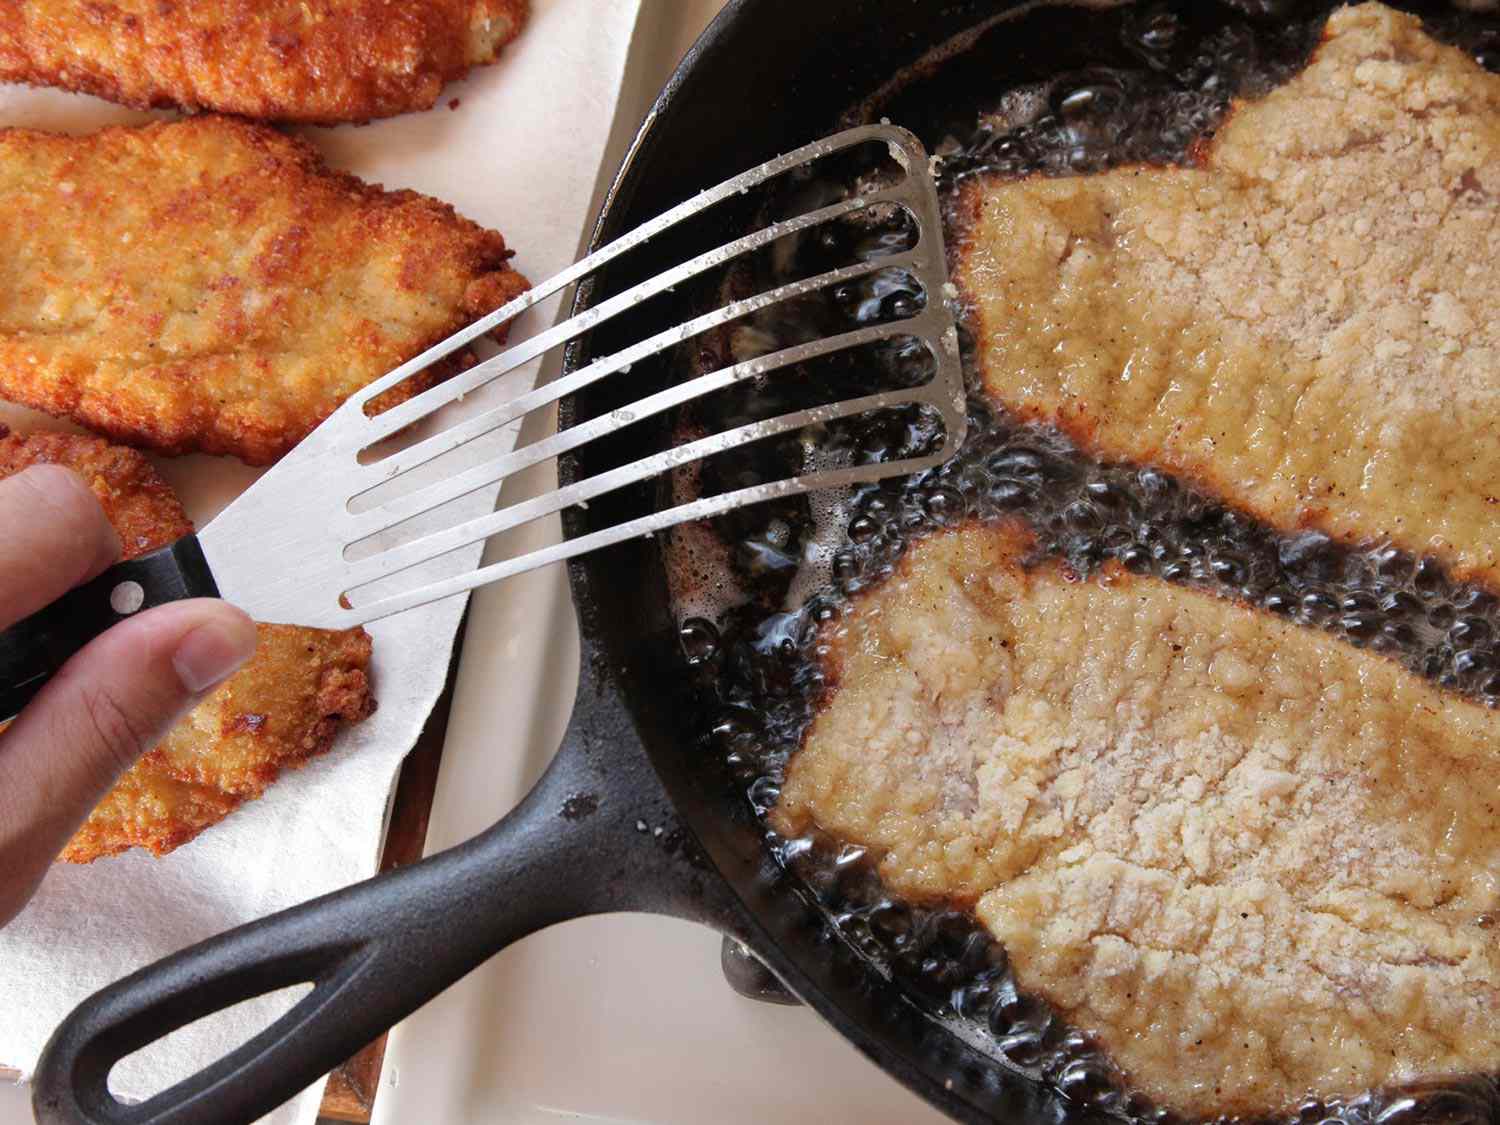 Finished fried chicken breasts laid on paper towel beside more chicken breasts deep-frying in cast iron skillet